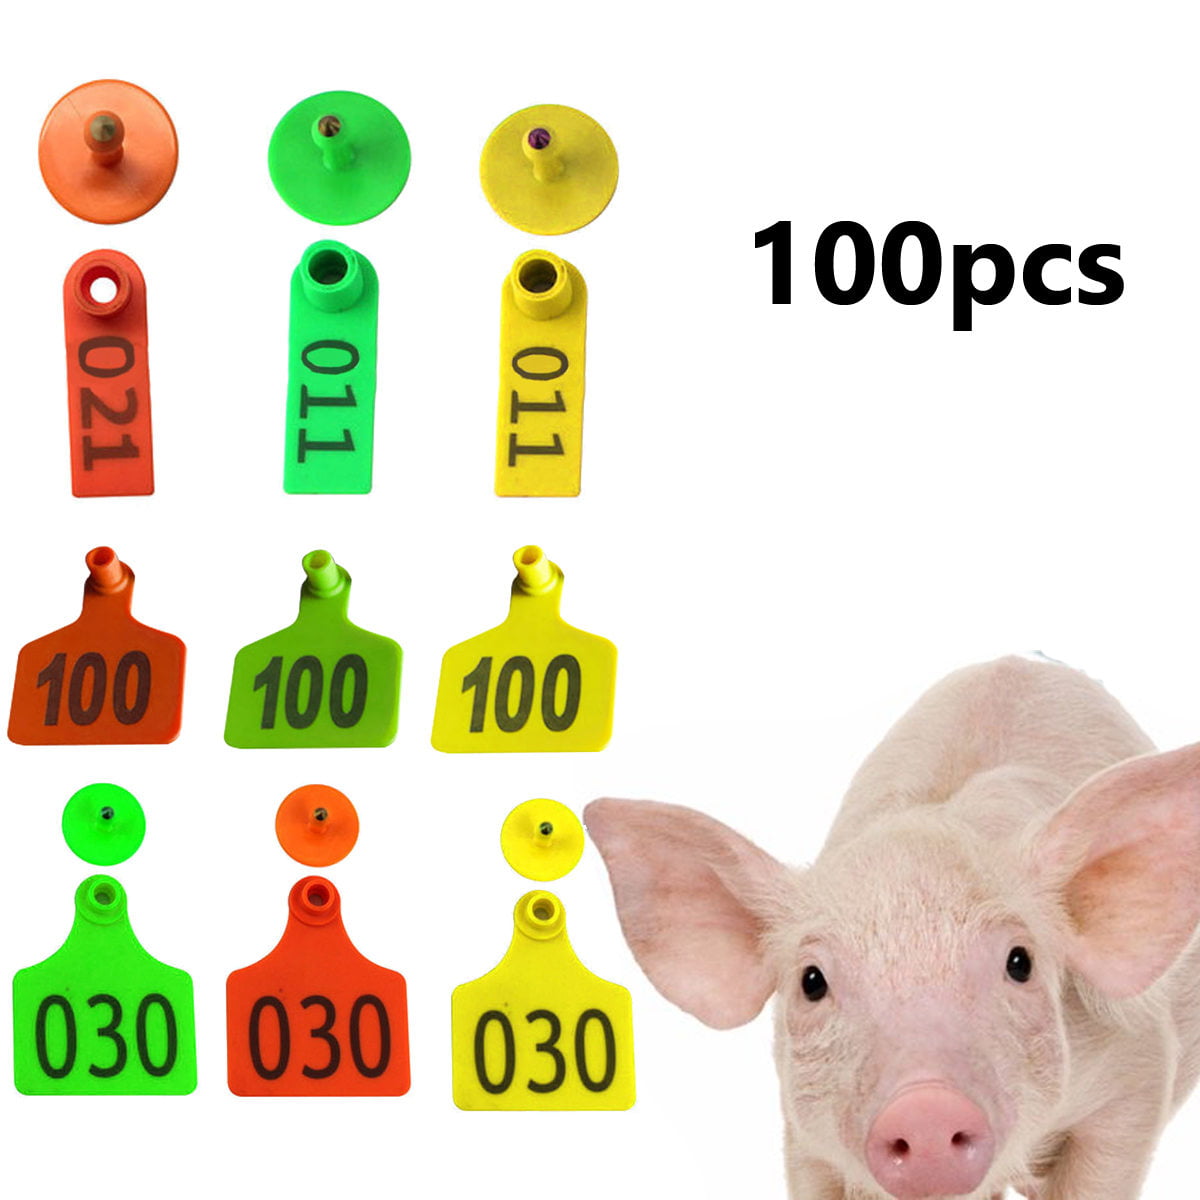 100PCS 001-100 Pre Numbered Livestock Ear Tag for Pig Goat Cow Sheep Green 